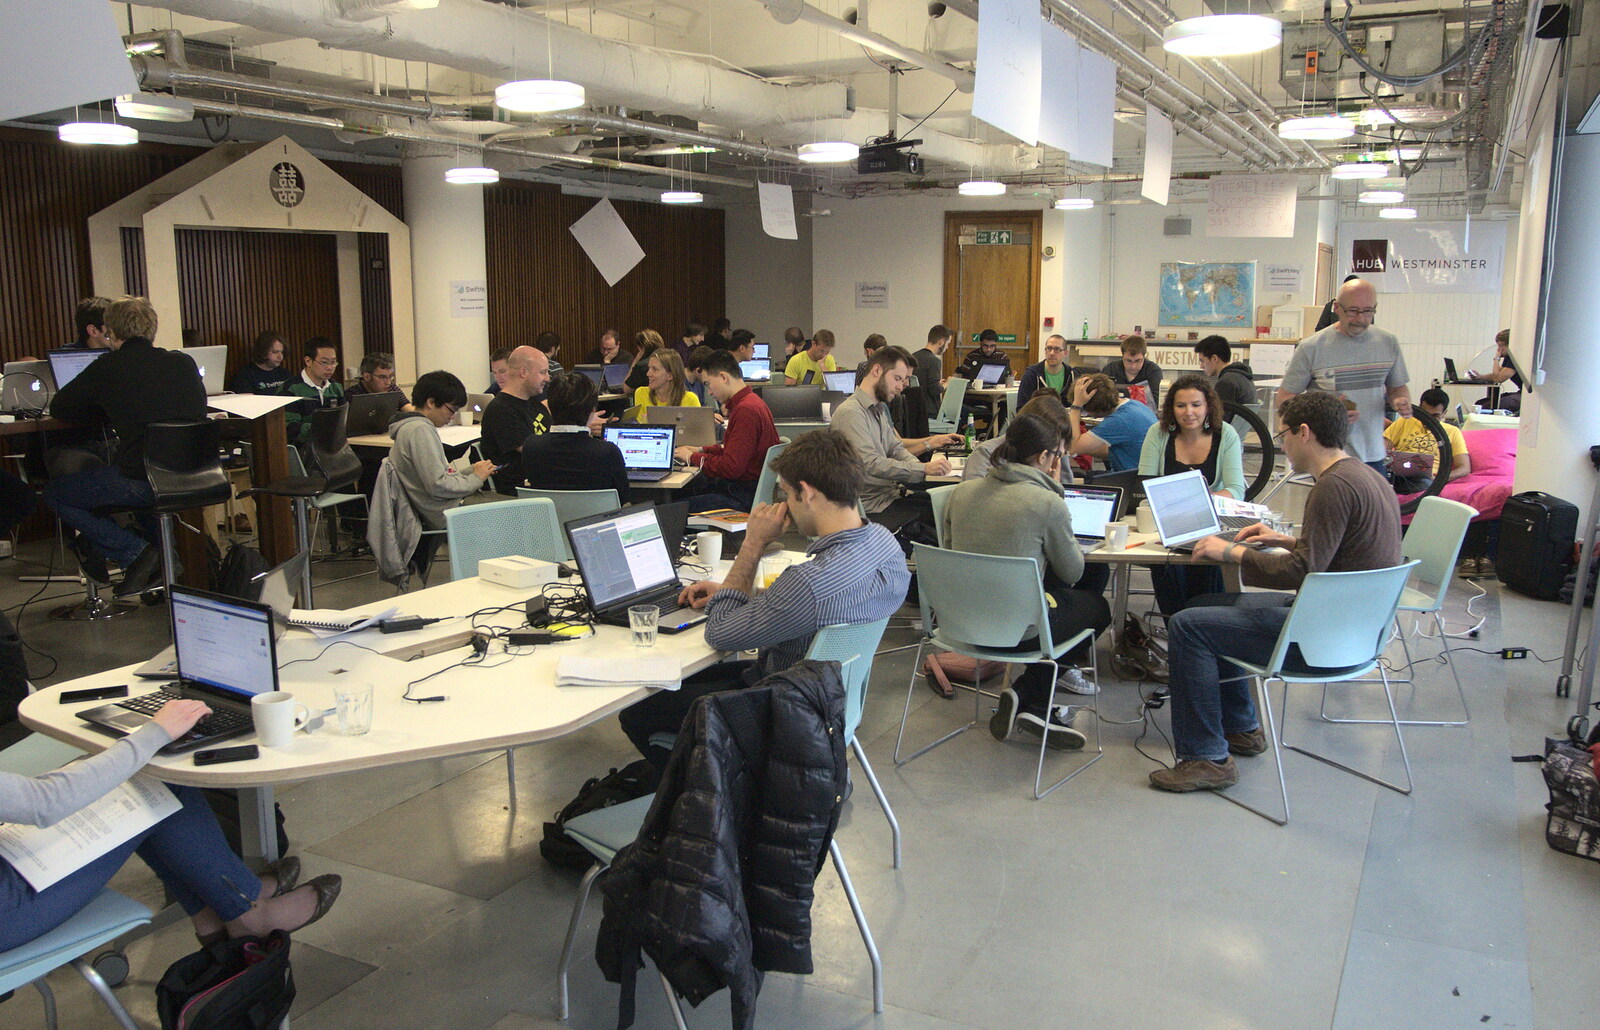 Nosher arrives fro Liverpool Street at 11am from A SwiftKey Hack Day, Westminster, London - 31st May 2013